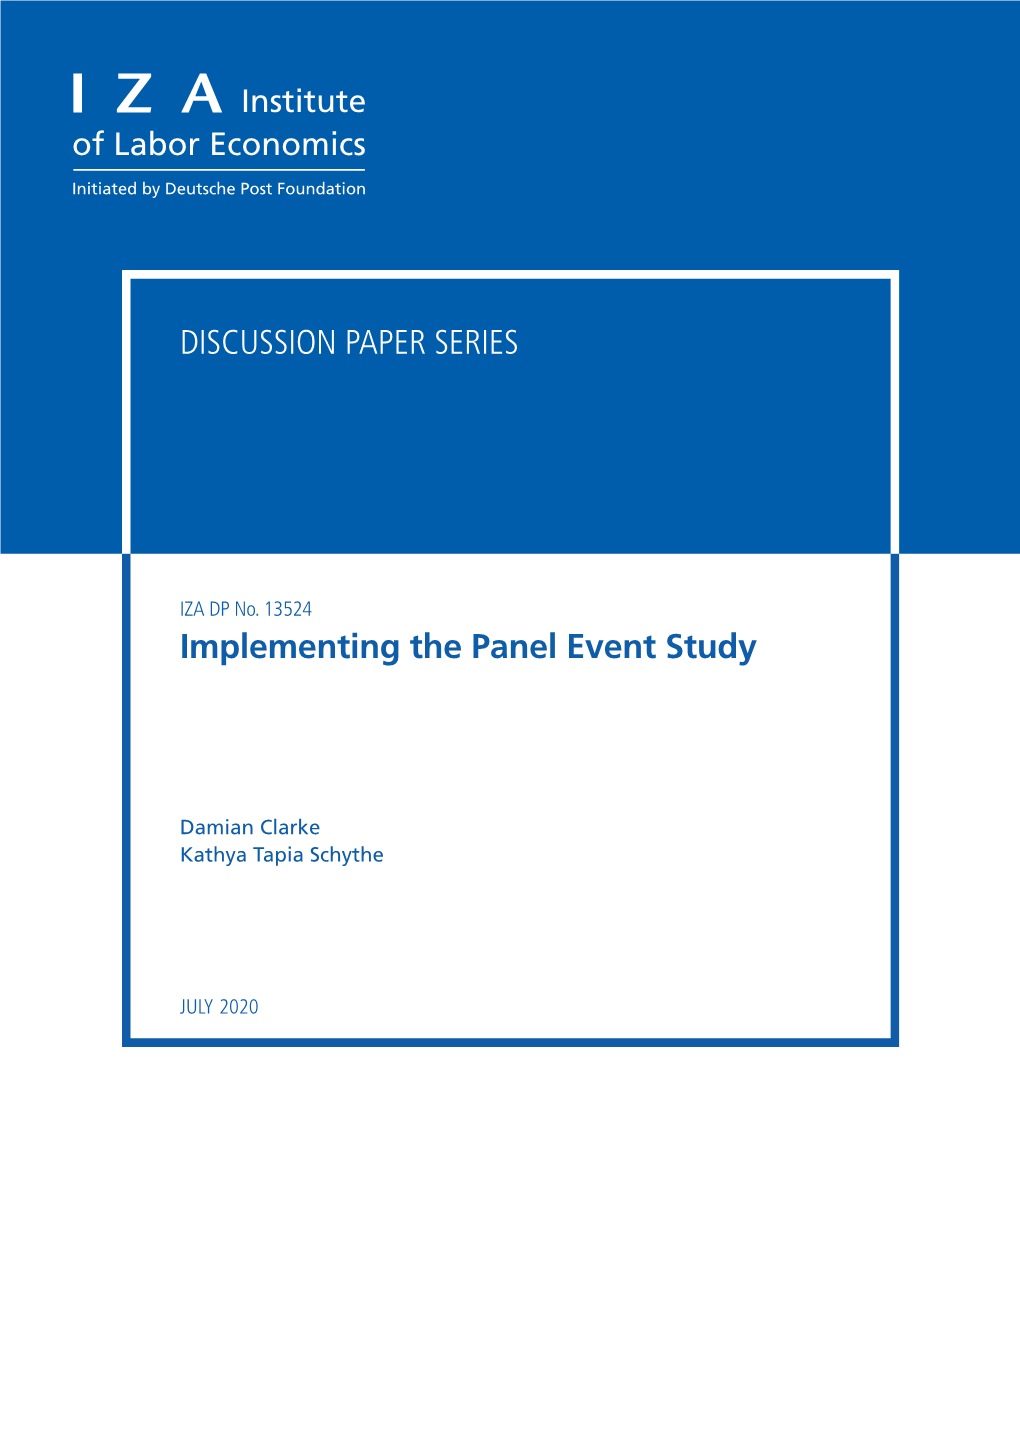 Implementing the Panel Event Study